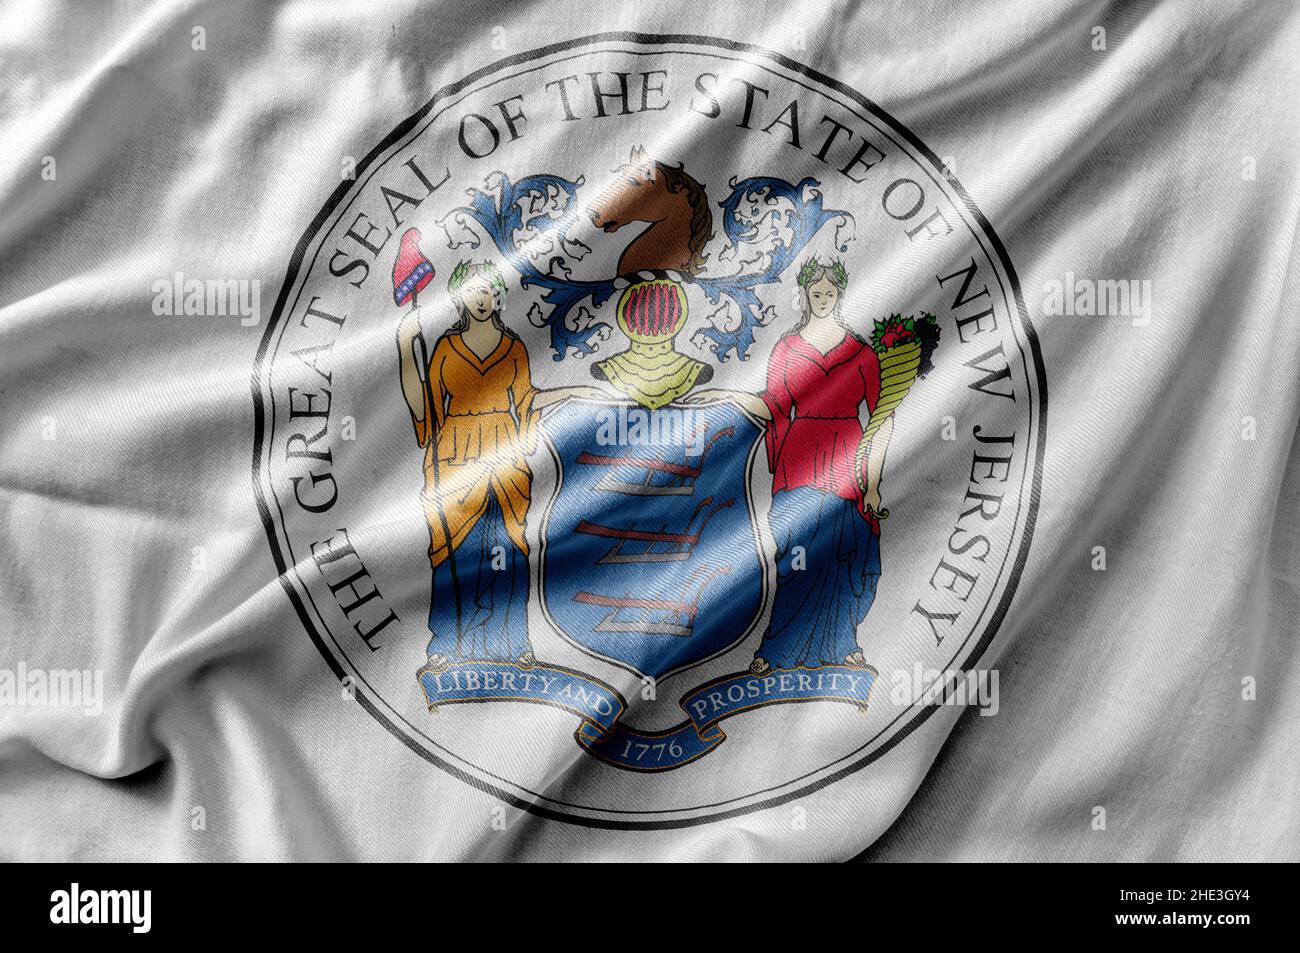 New jersey state seal hi